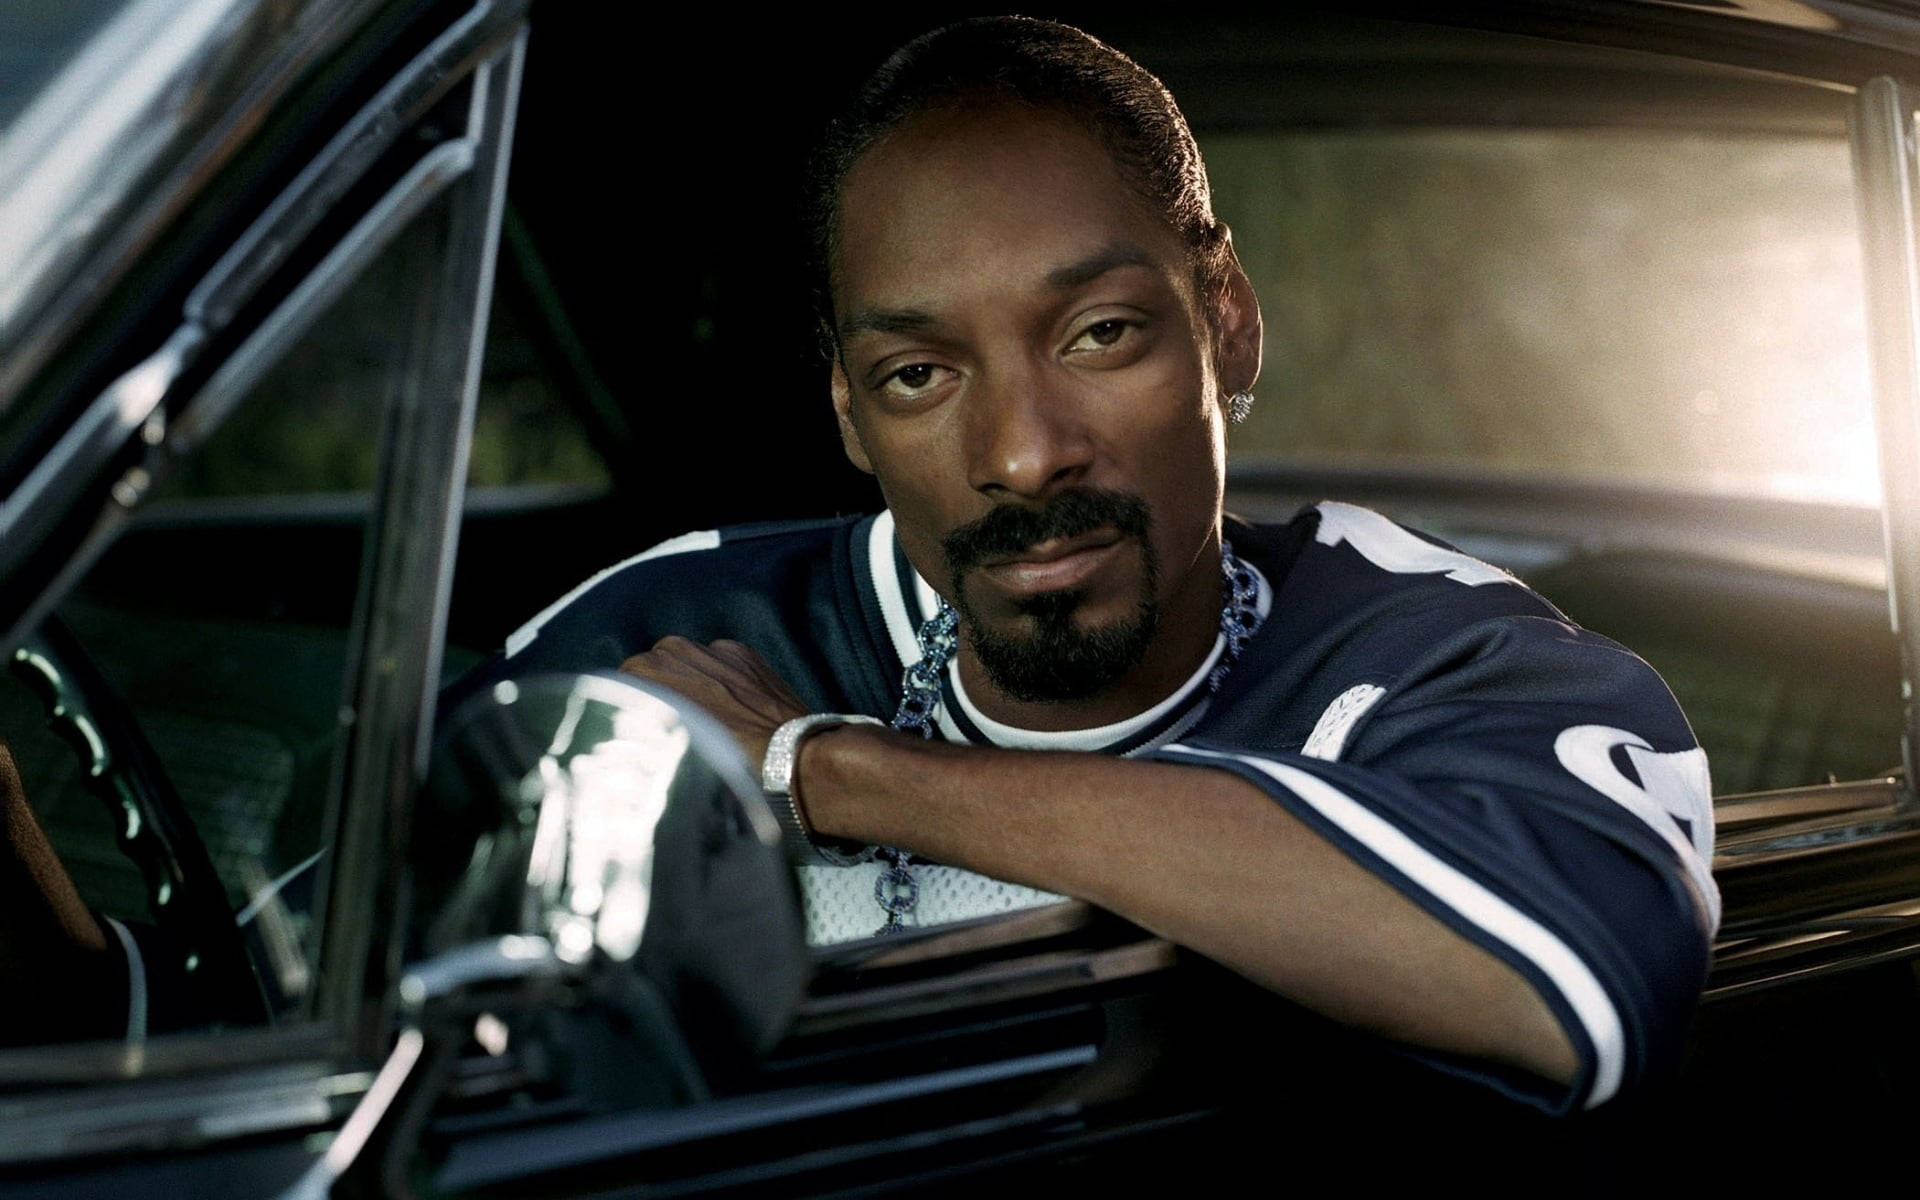 Snoop Dogg Chilling In A Car